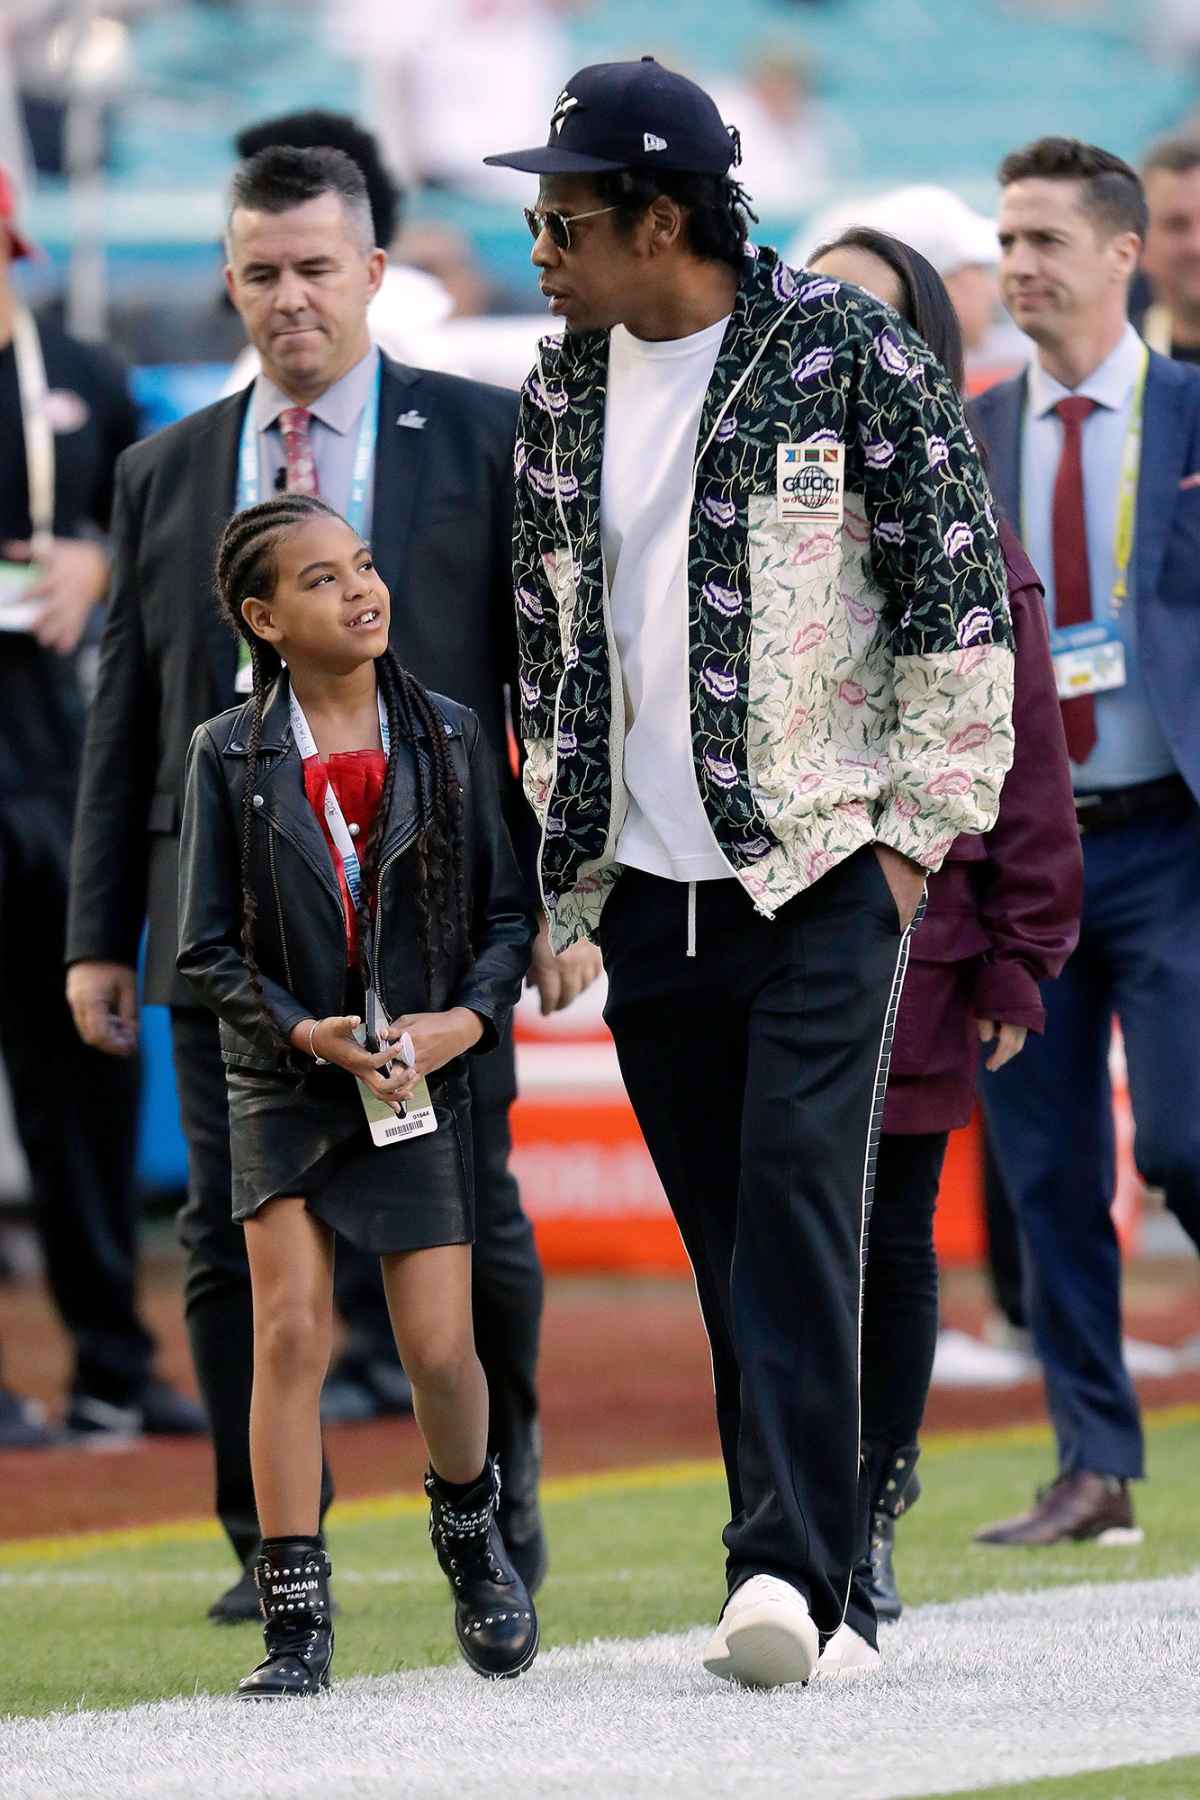 Jay-Z embarrasses Blue Ivy at NBA Finals by pulling her in for on